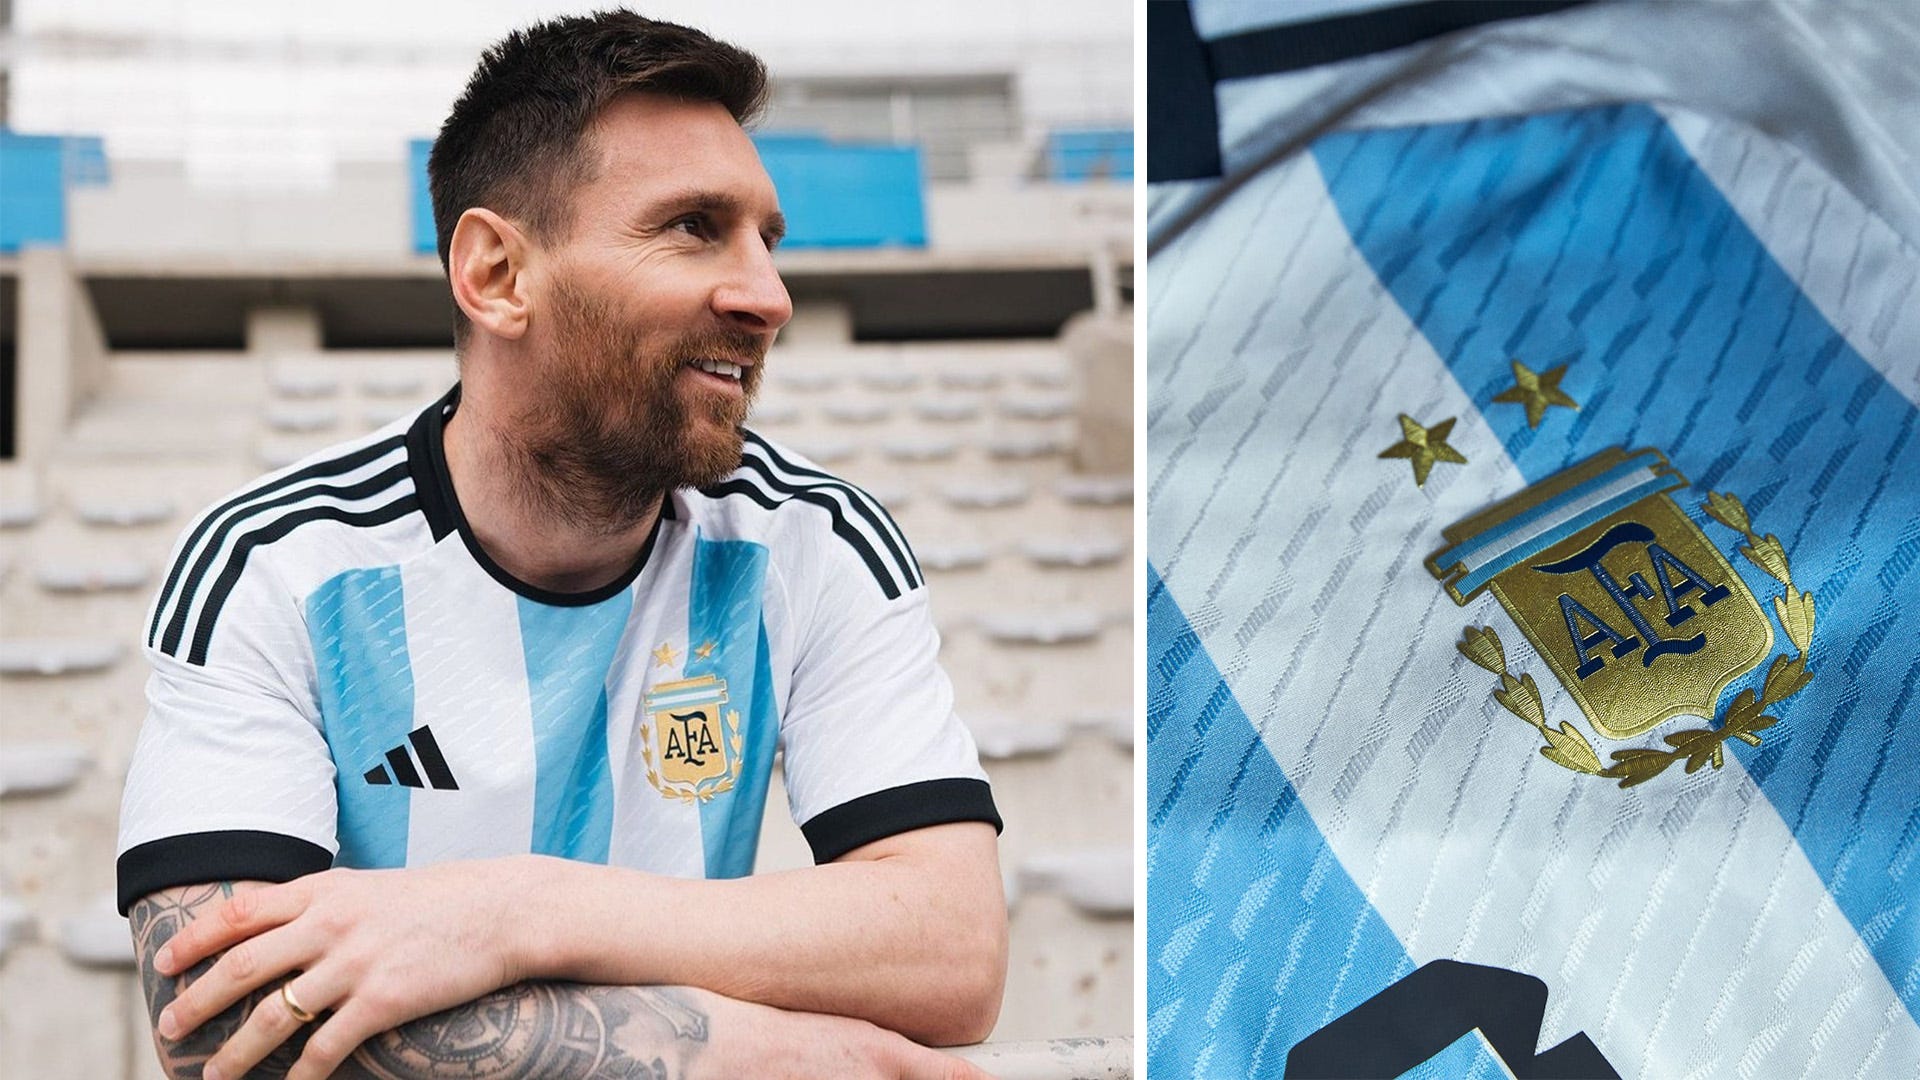 adidas go classic with a twist for Argentina's 2022 World Cup home kit |  Goal.com